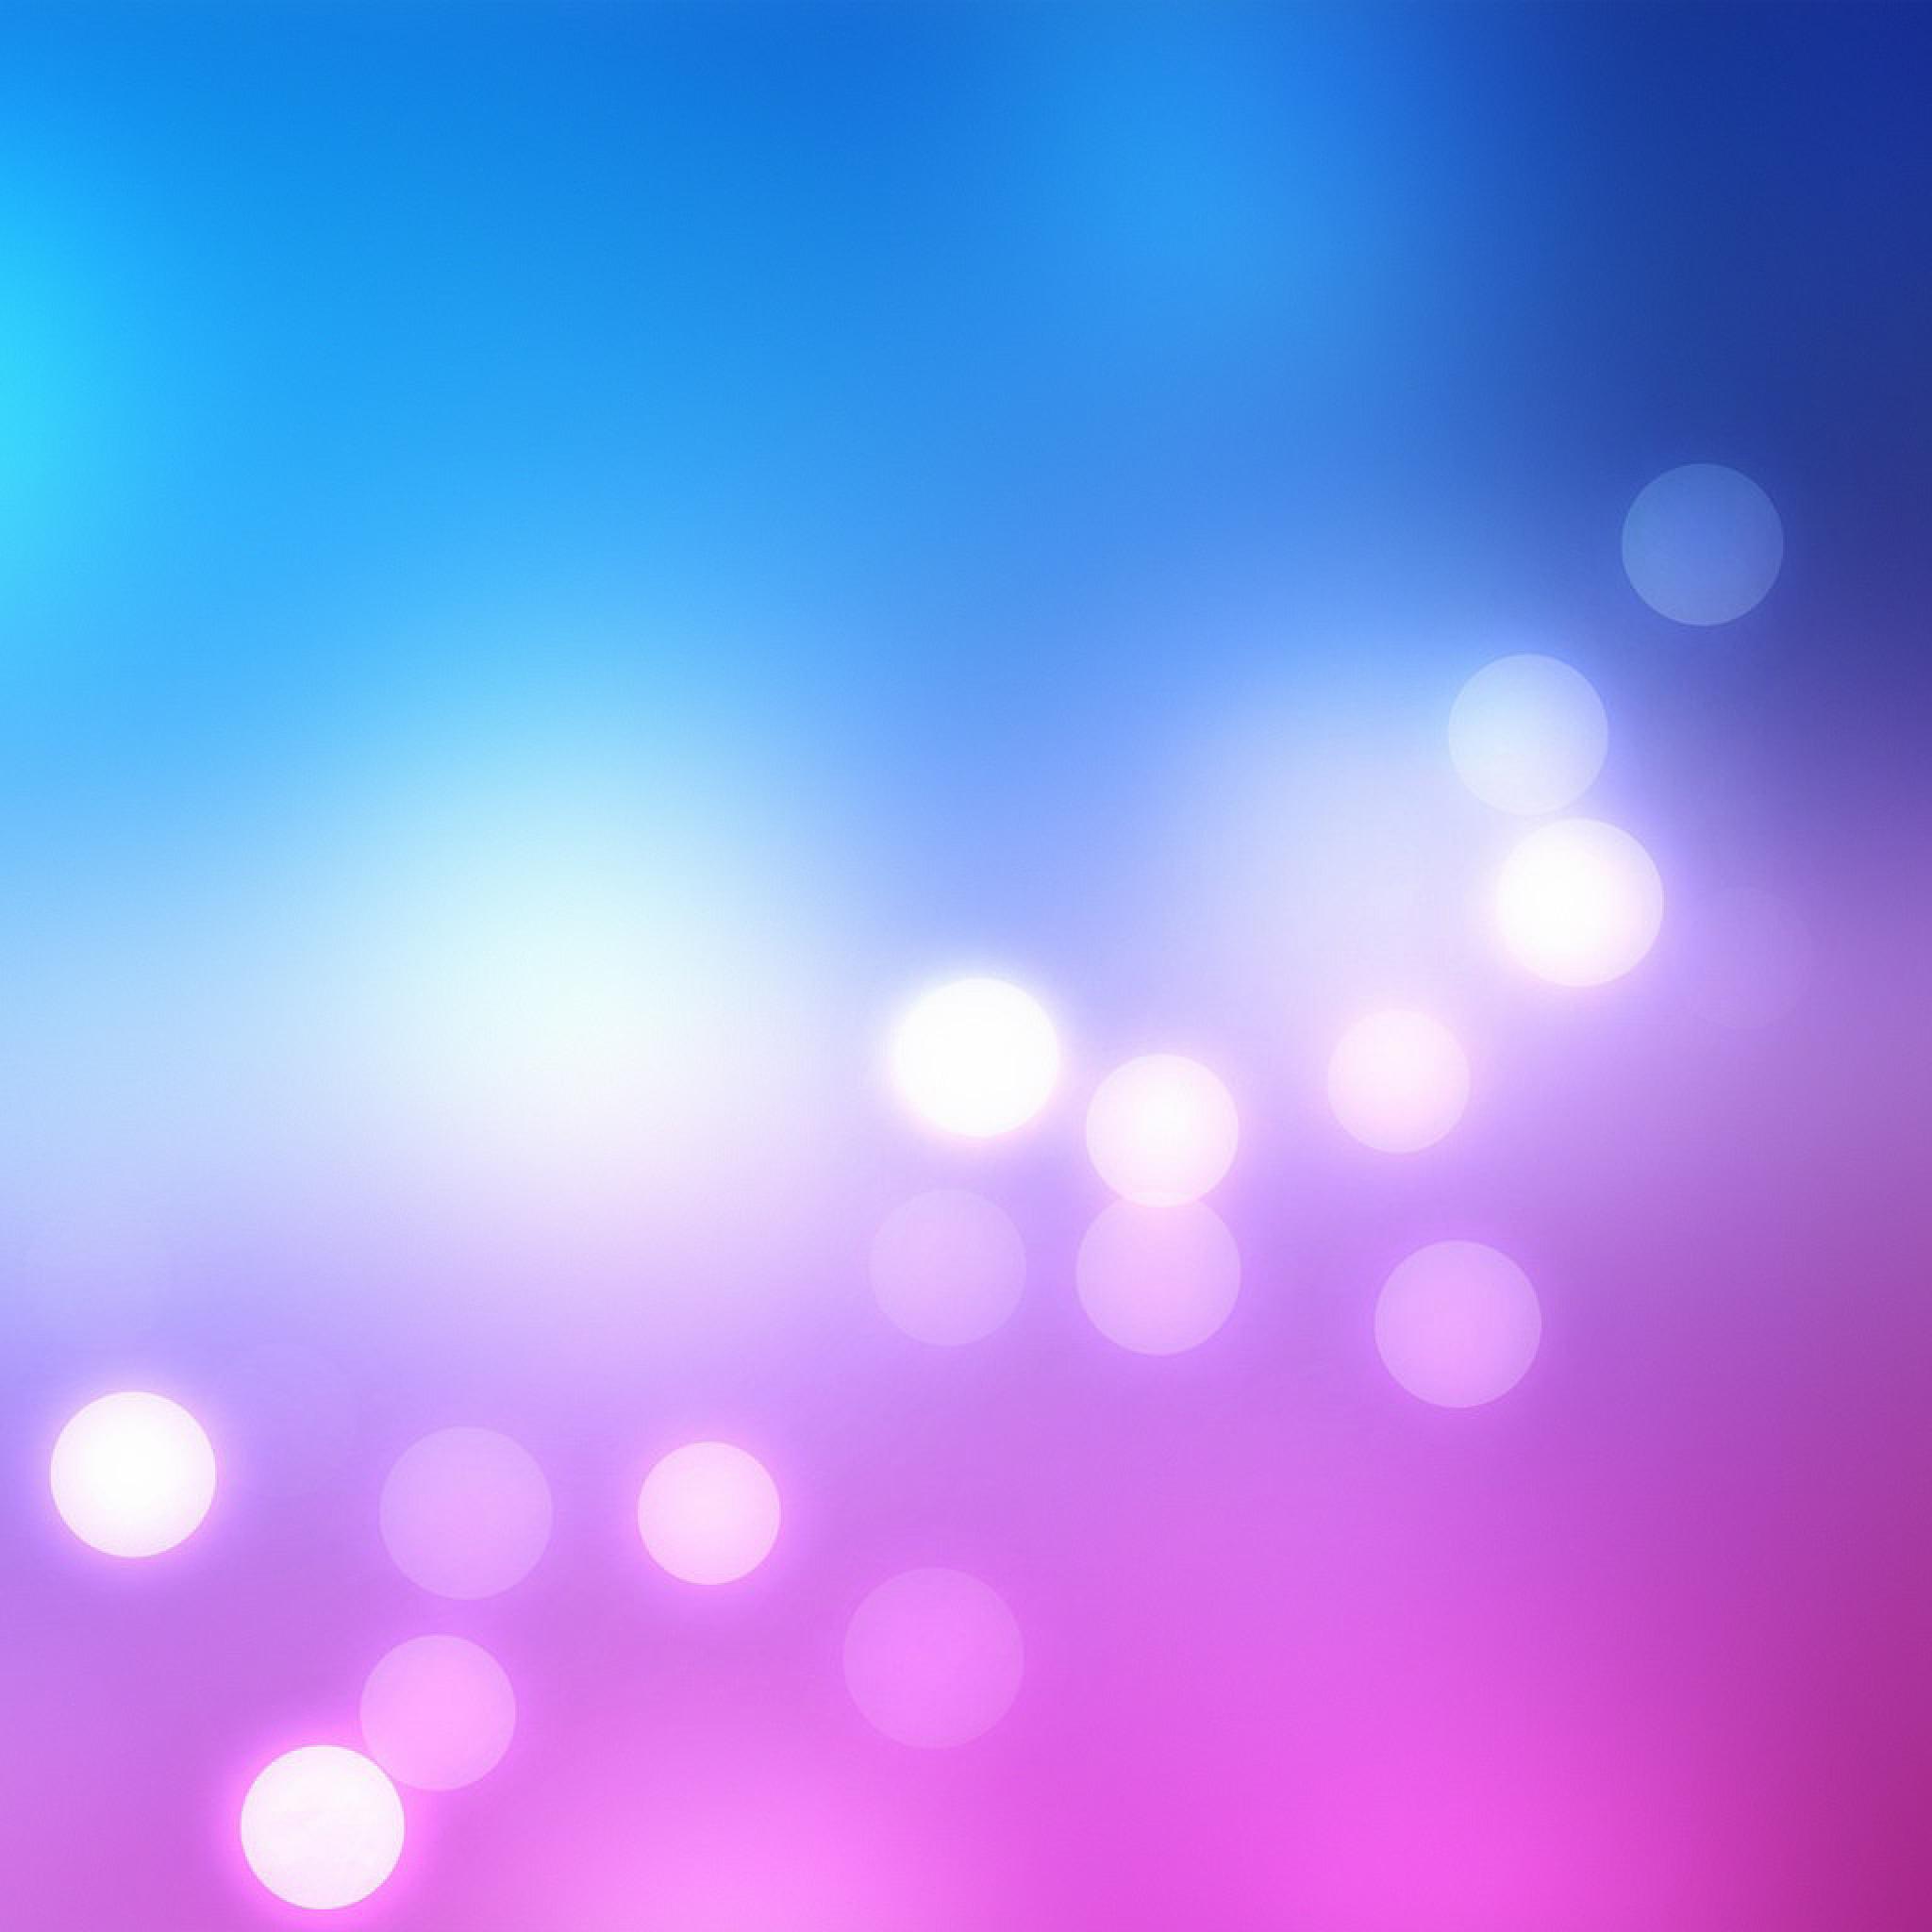 Wallpapers For Party Lights Backgrounds | HD Wallpapers Range